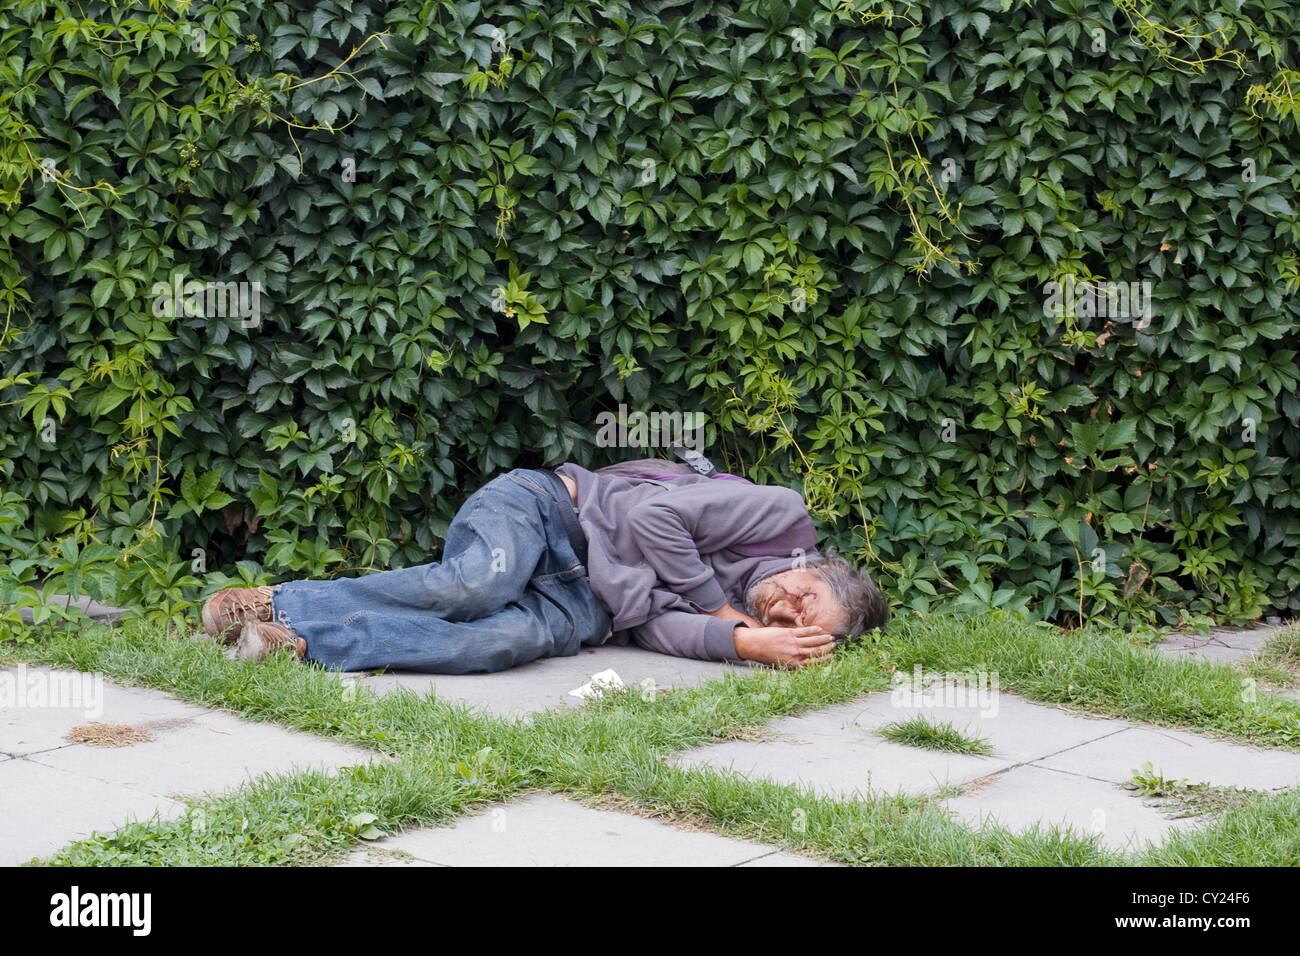 A Drunk asleep on the streets of Prague with A cut face Stock Photo